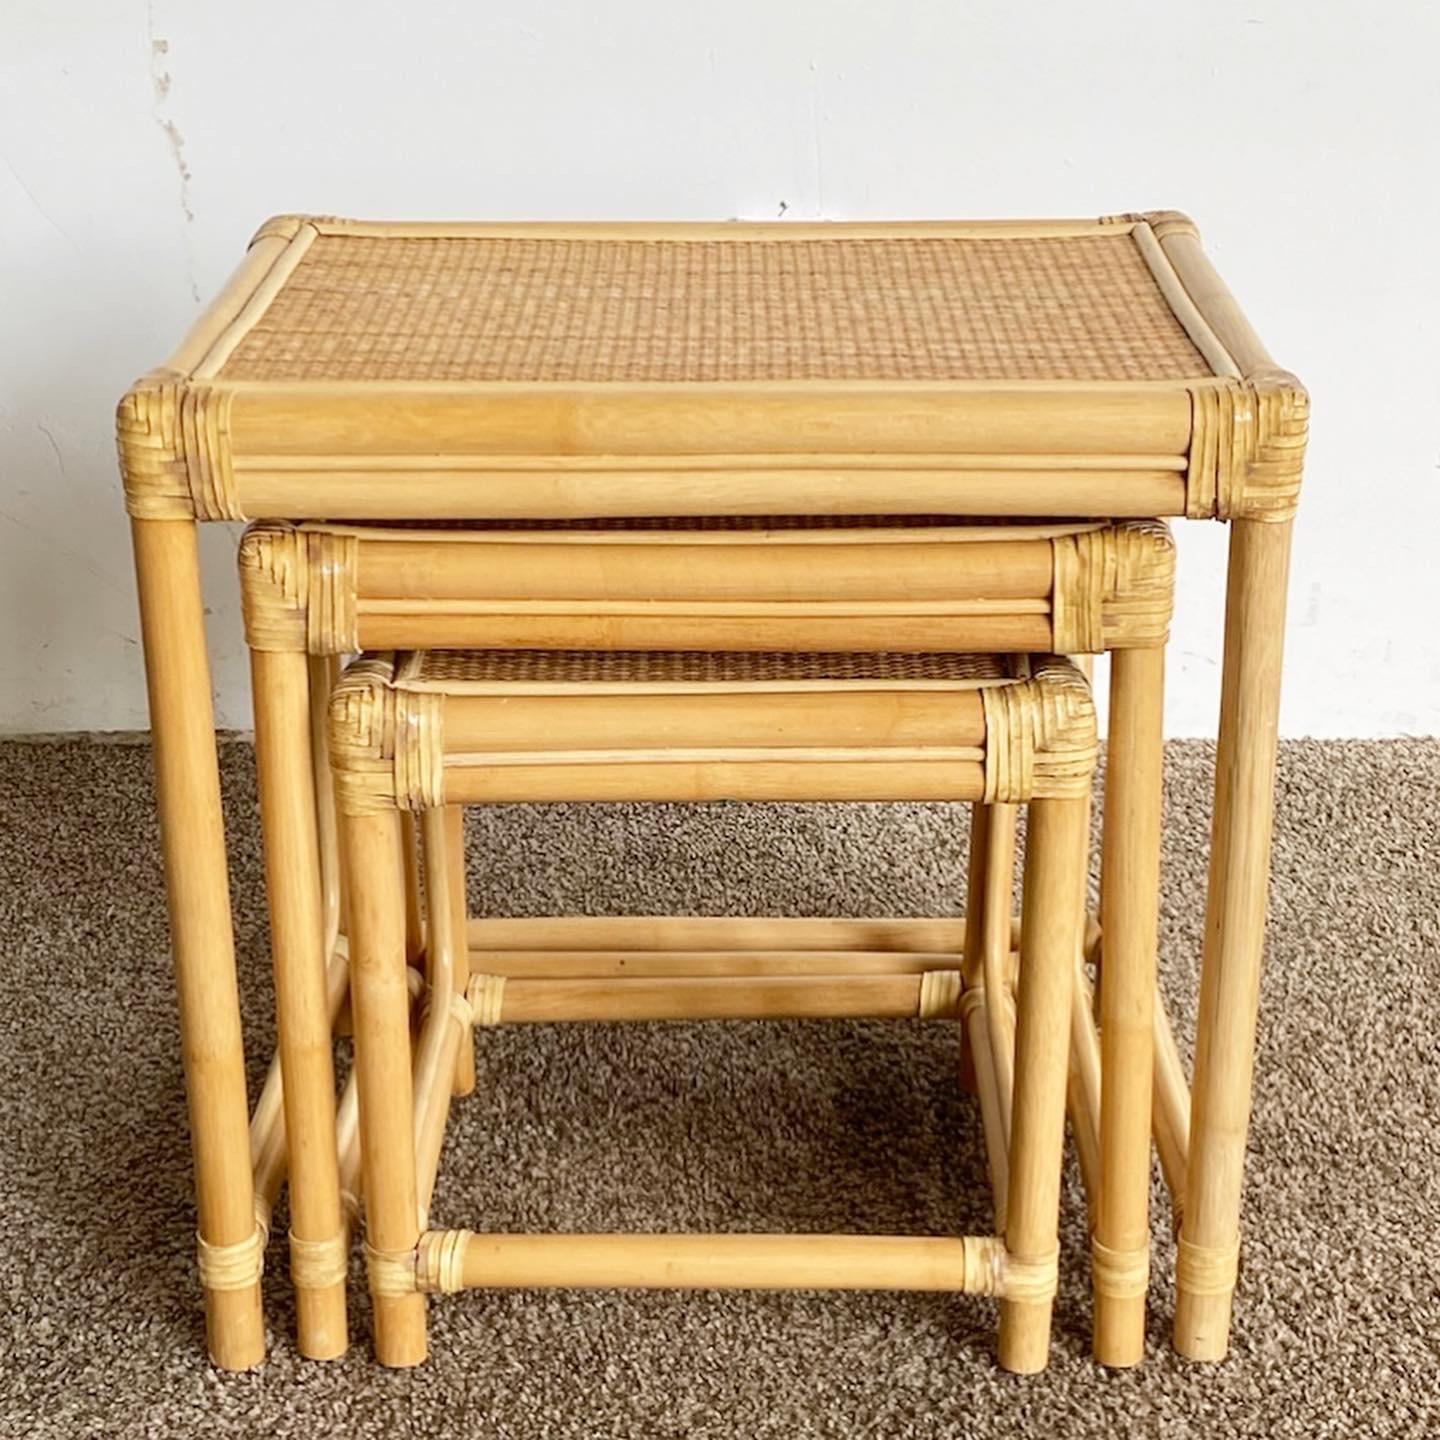 Boho Chic Bamboo Rattan and Wicker Nesting Tables, Set of 3 For Sale 4